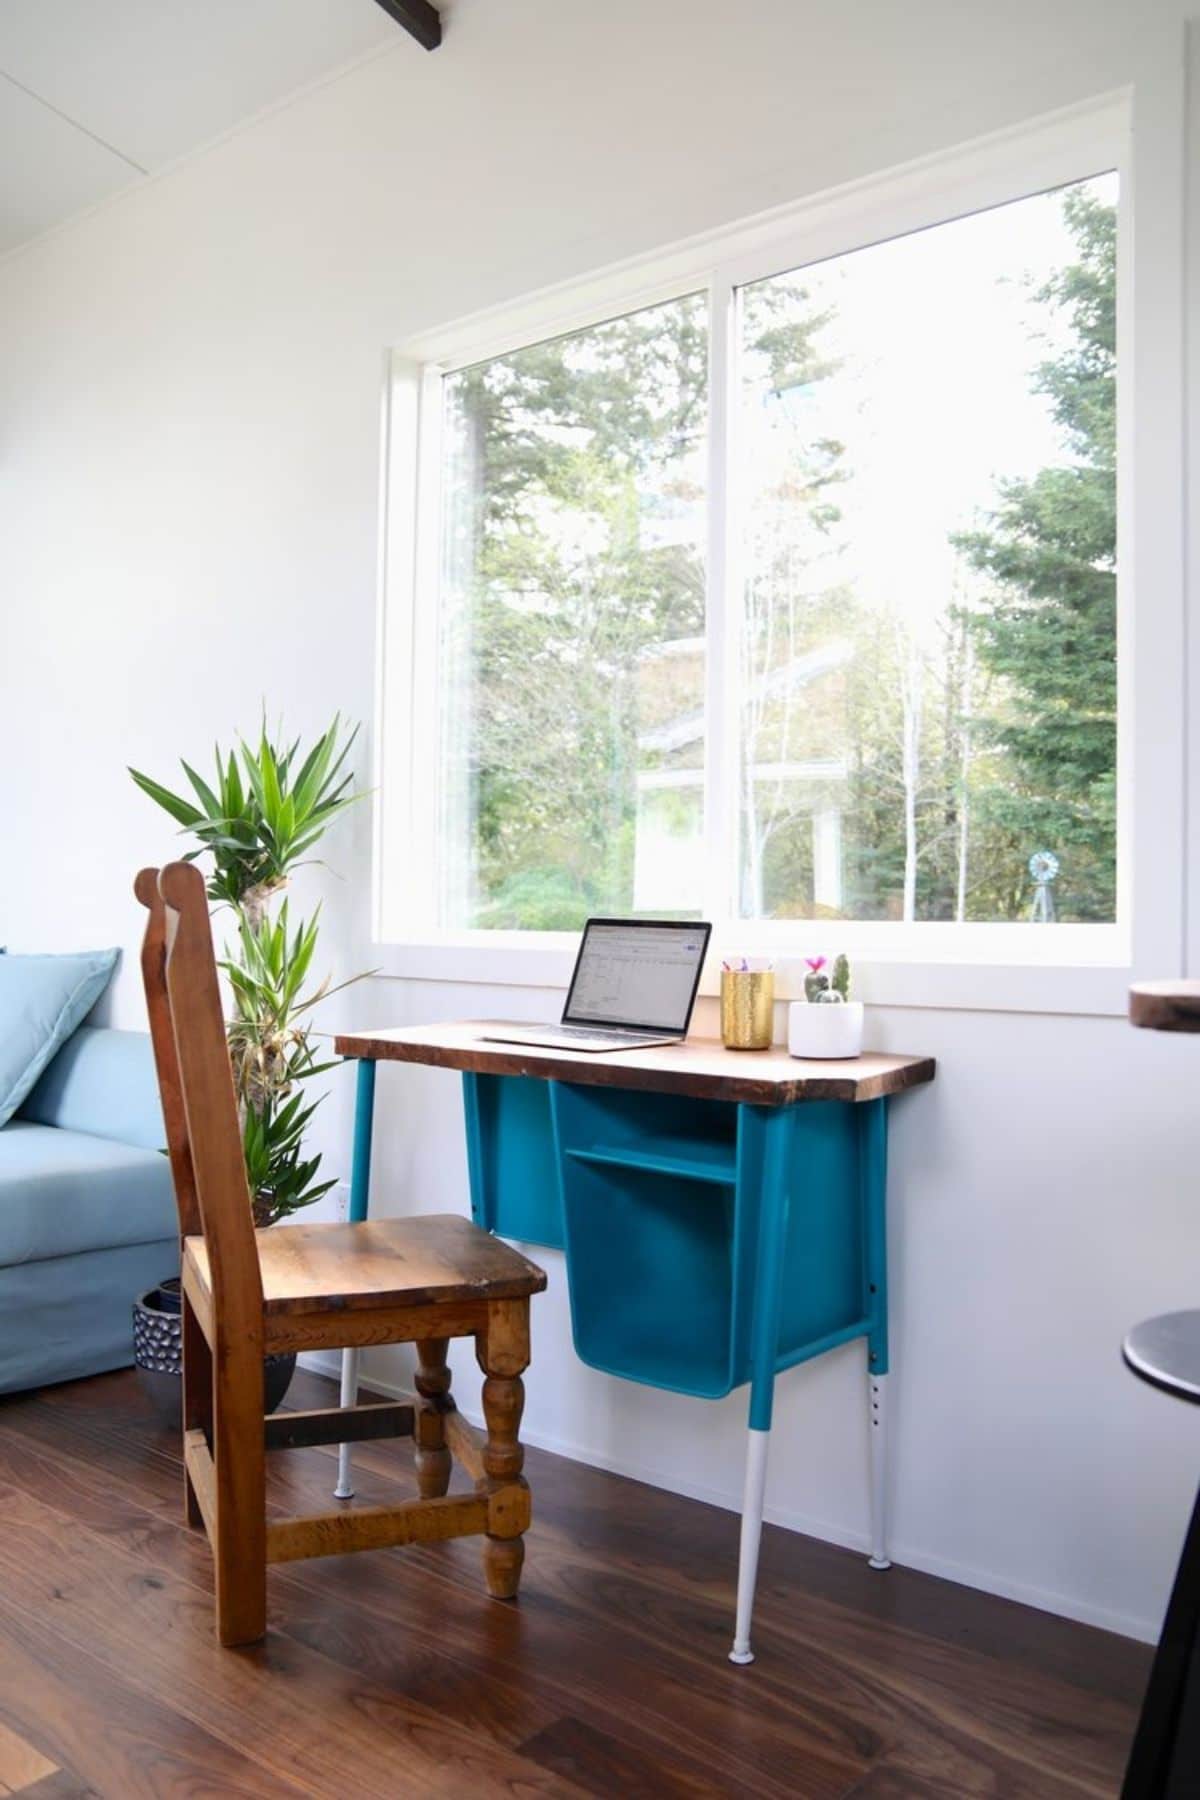 Teal writing desk with wooden chair below large picture window in white wall